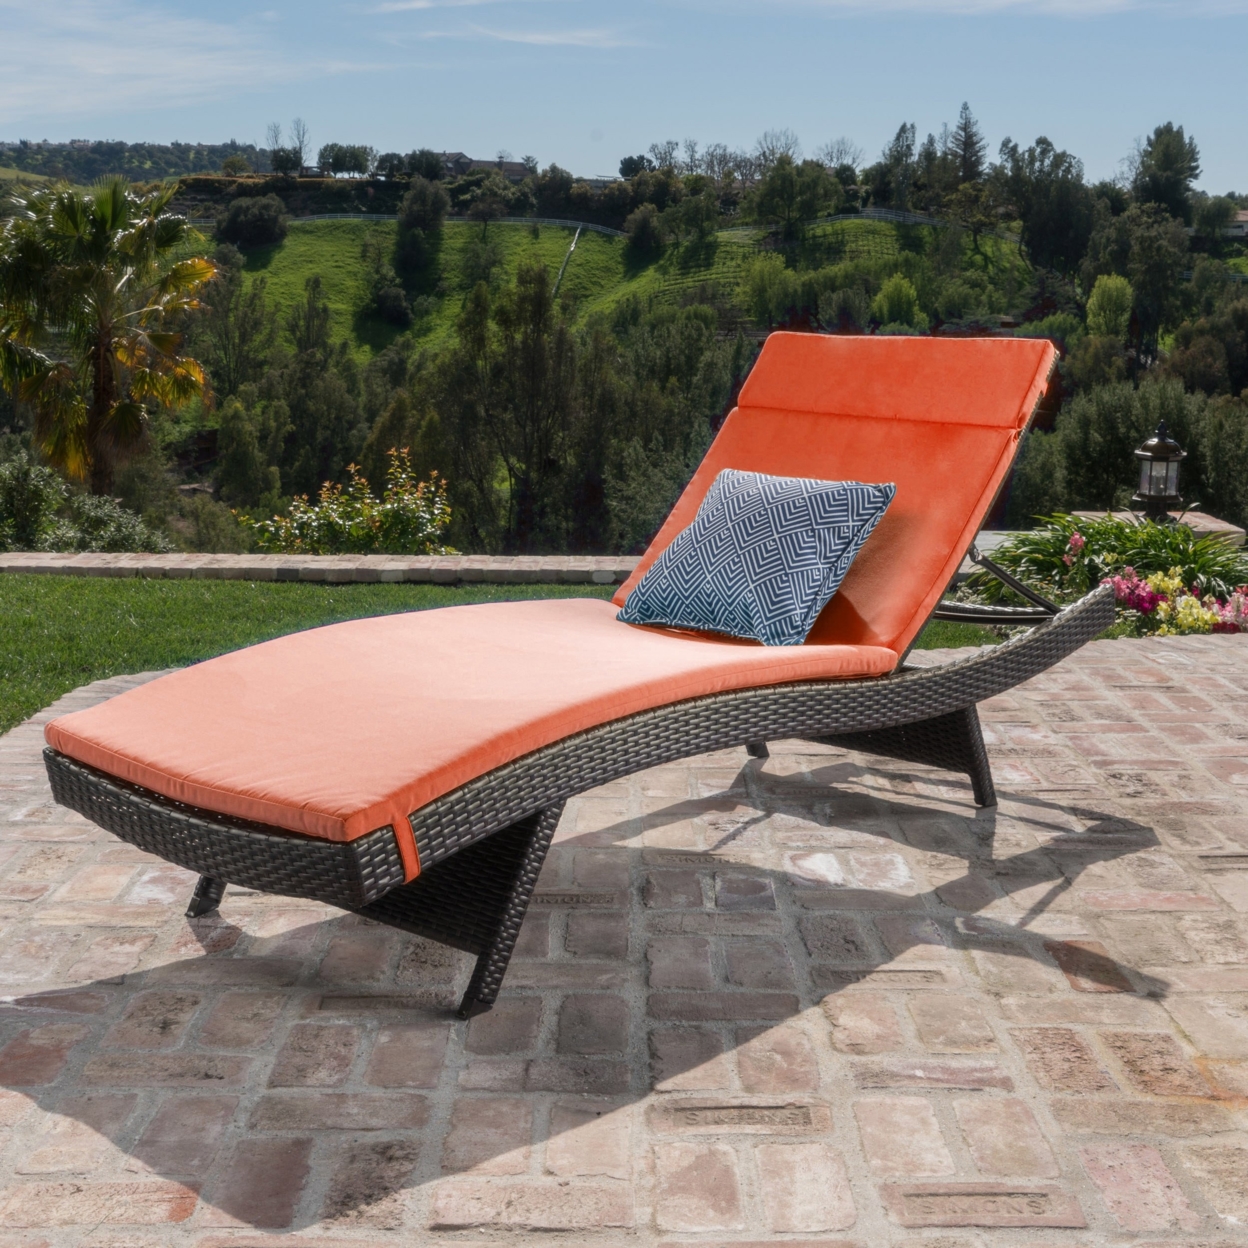 Savana Outdoor Wicker Lounge With Water Resistant Cushion - Multibrown/orange, Qty Of 1